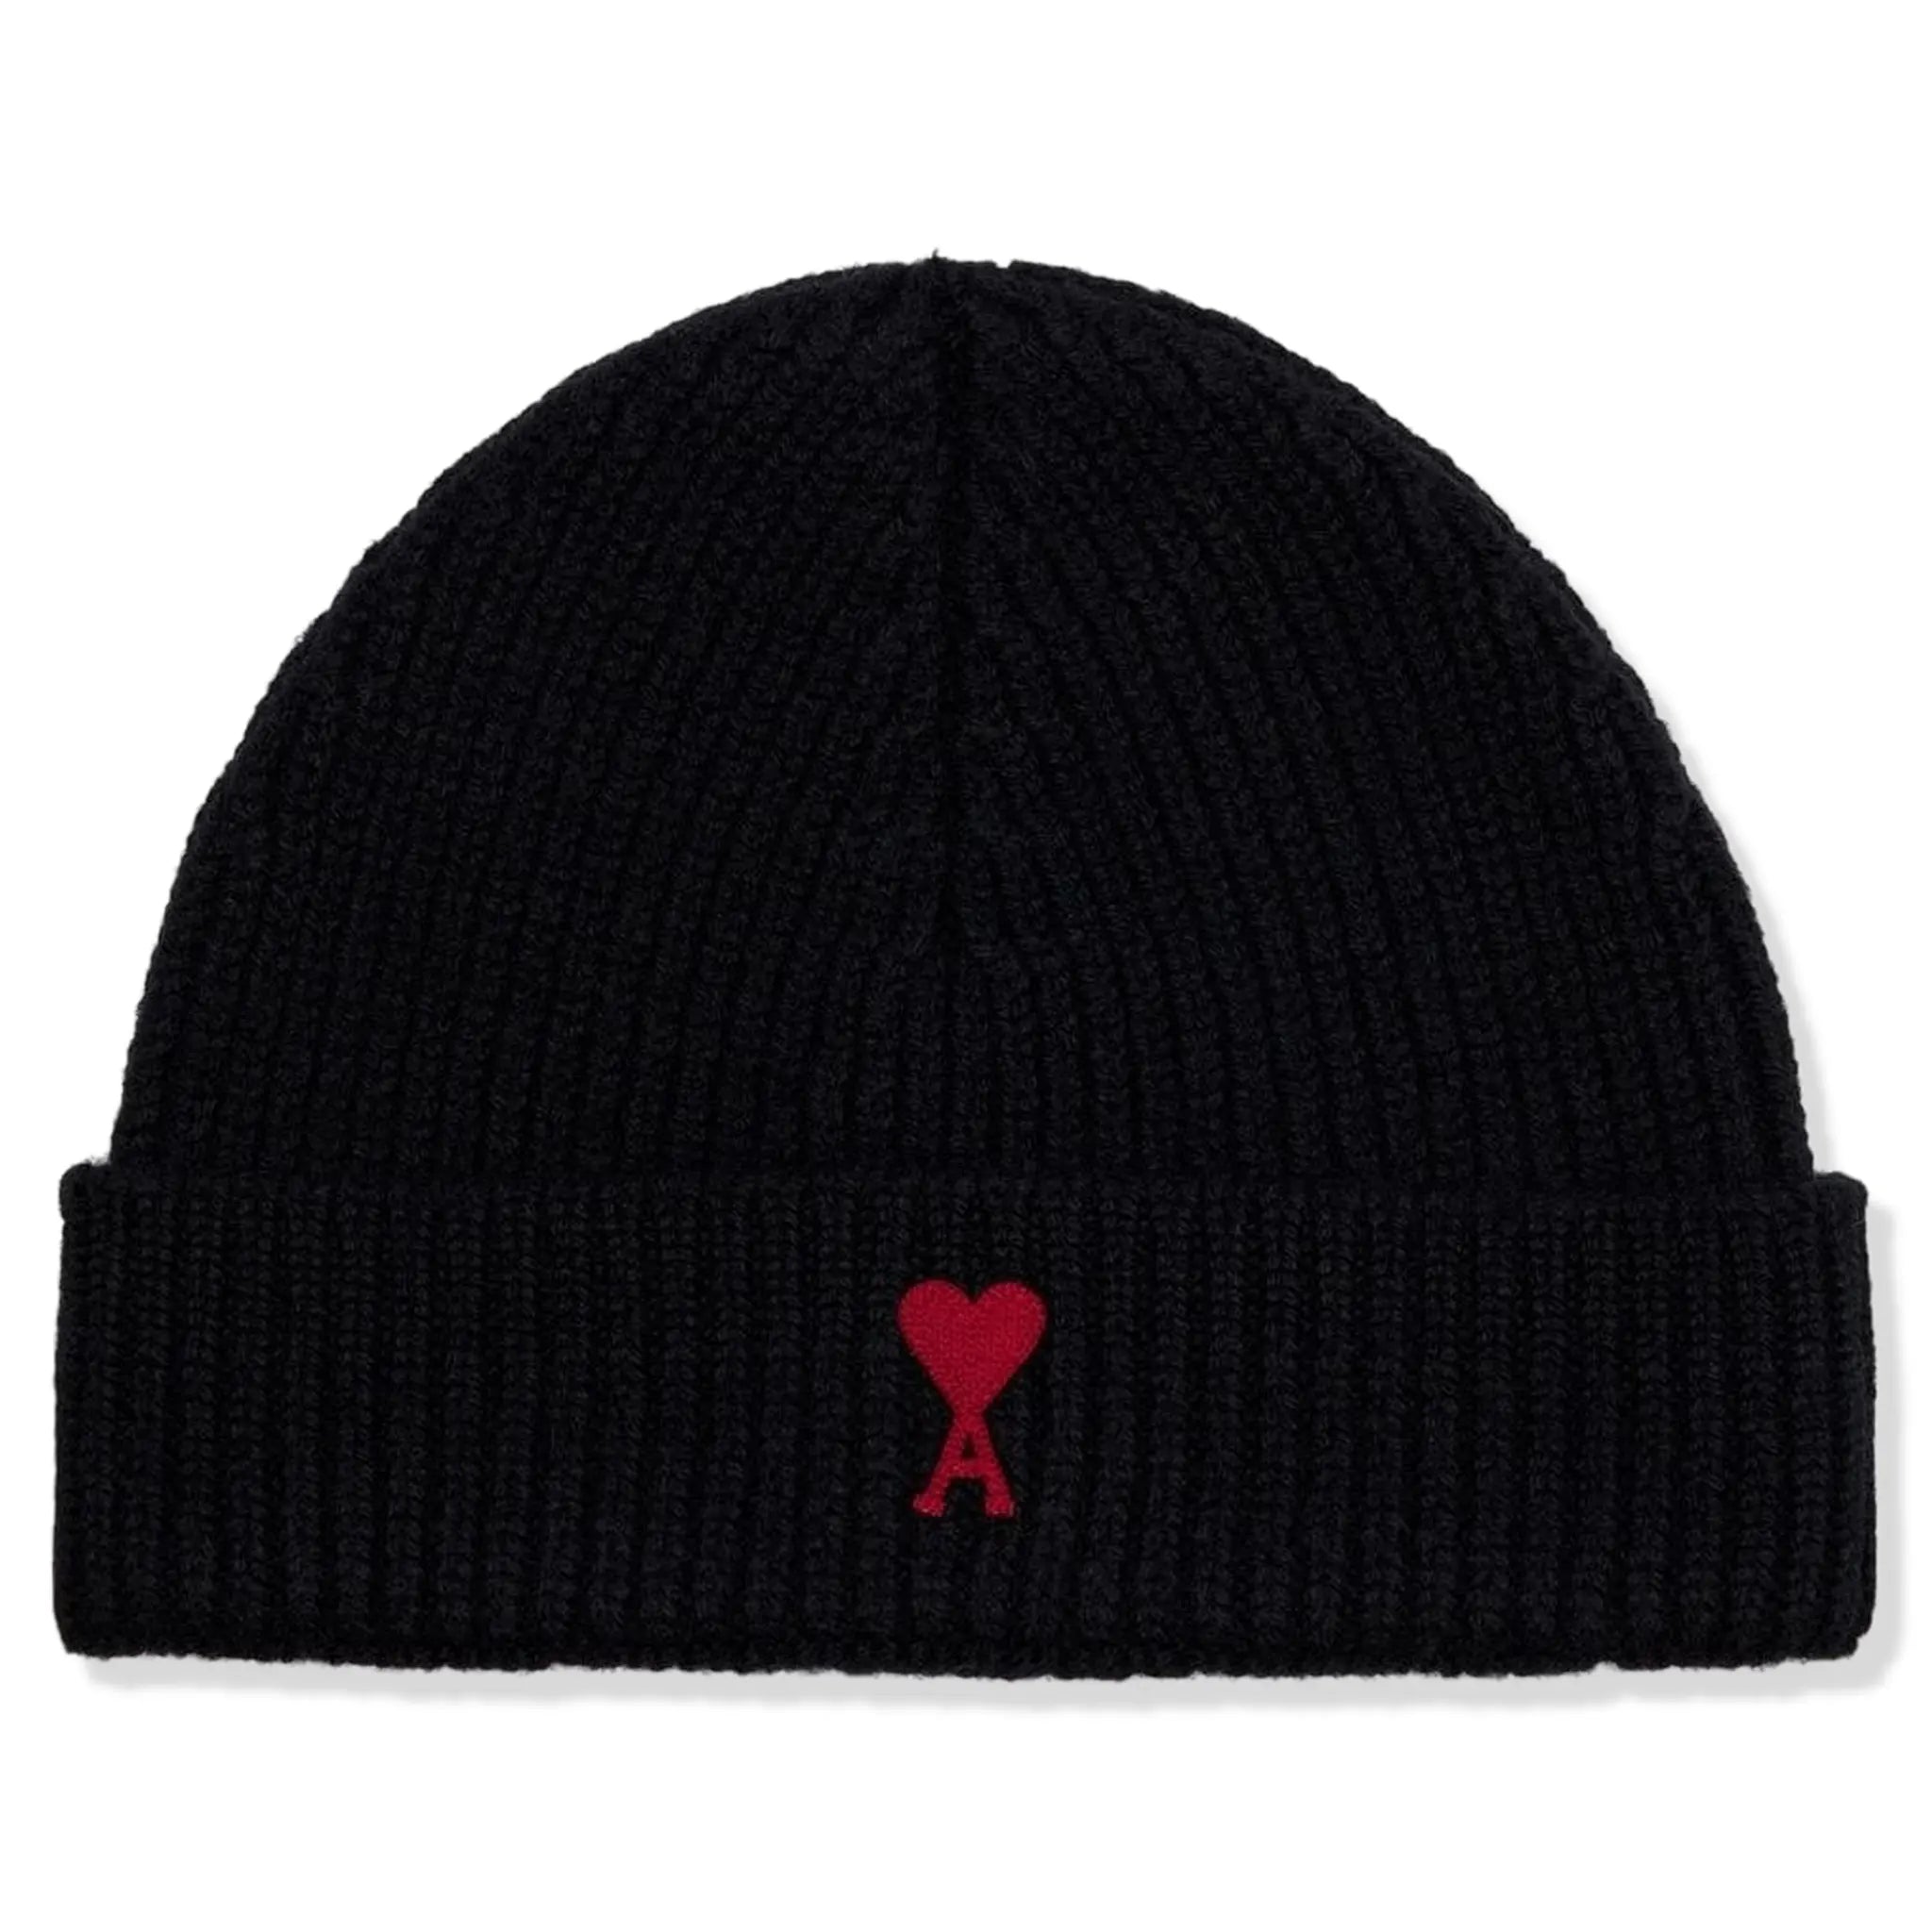 Front view of Ami Paris Red ADC Black Beanie Hat h23bfuha106018